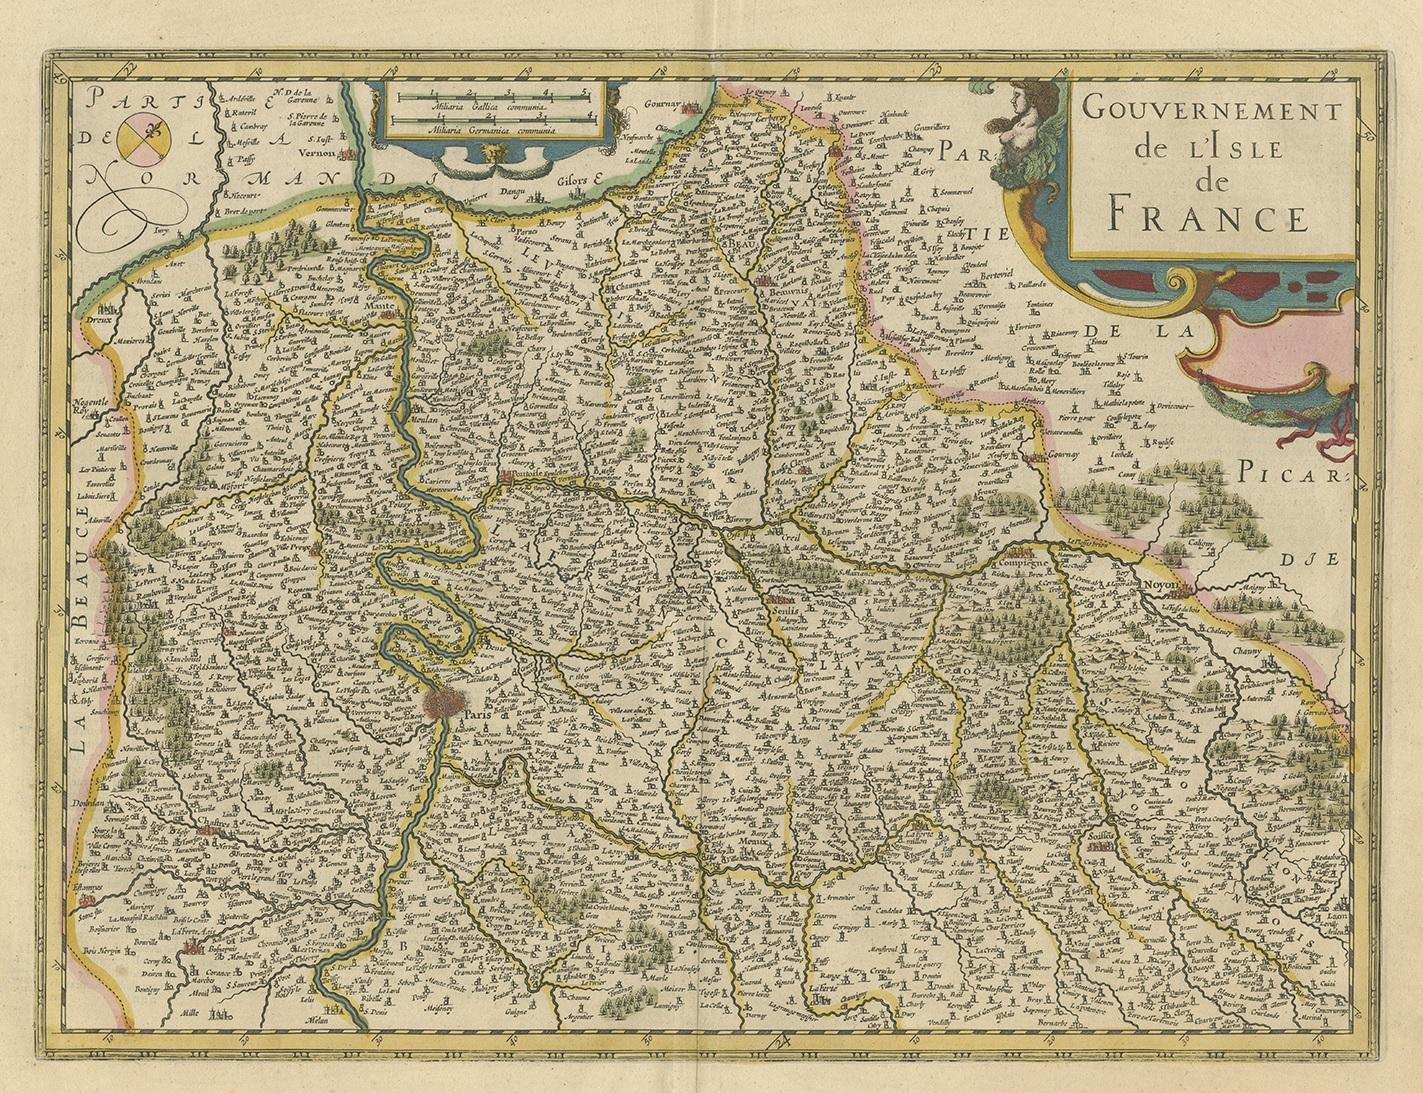 Antique map titled Gouvernement de l'Isle de France'. Old map of the region of Île-de-France, France. It is located in the north-central part of the country and often called the région parisienne (